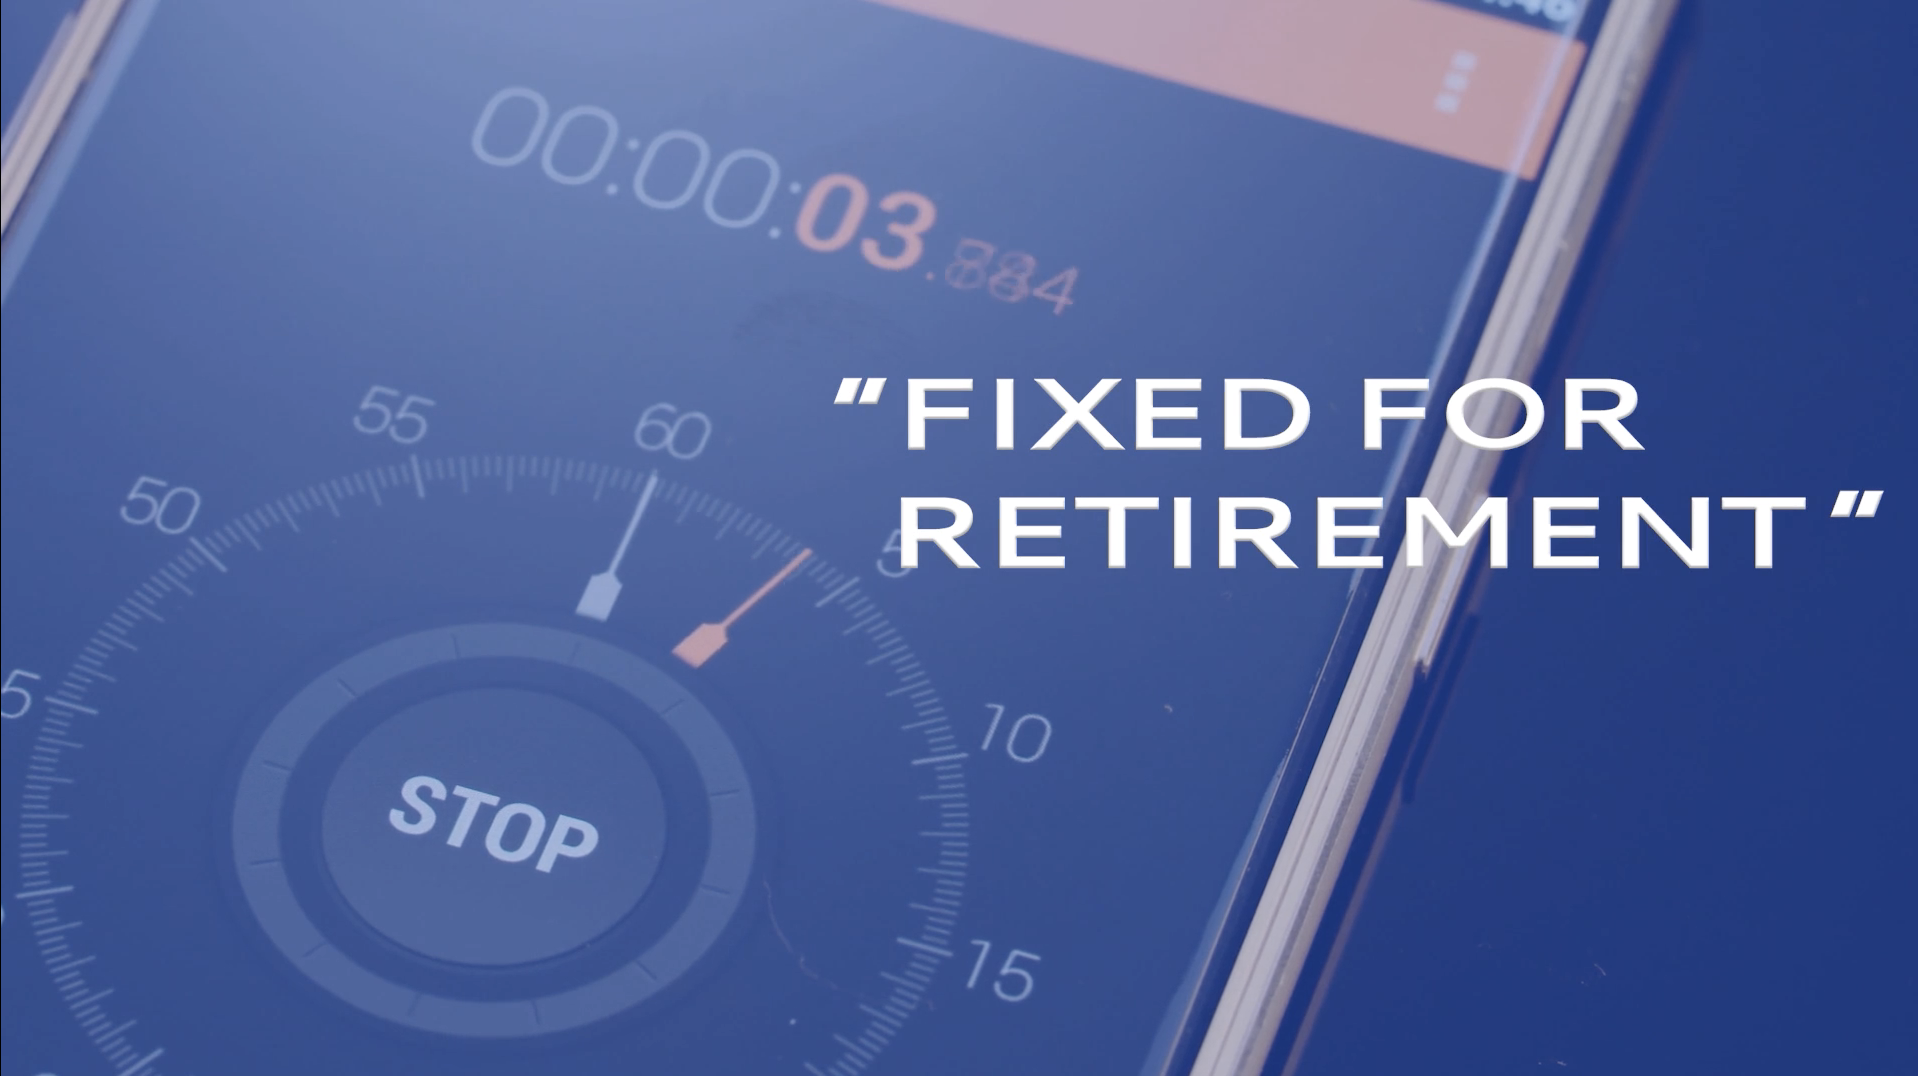 Just a Minute with Fenimore: “Fixed for Retirement”